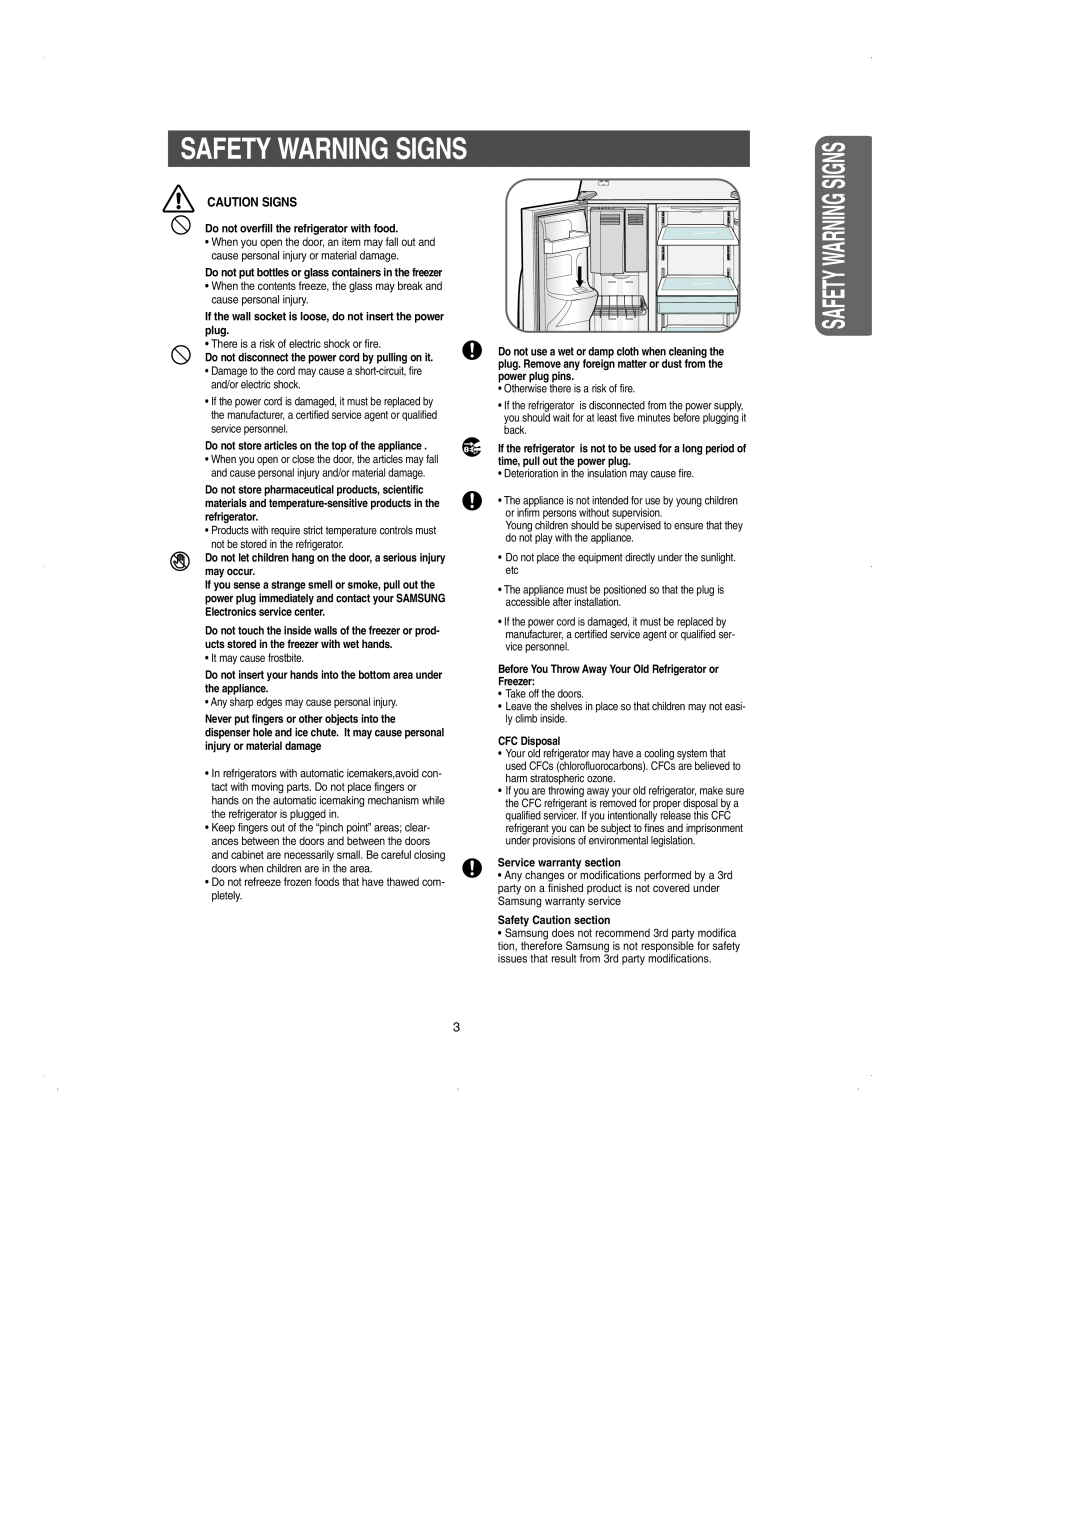 Samsung RS2531 installation instructions Caution Signs, Safety Warning Signs 